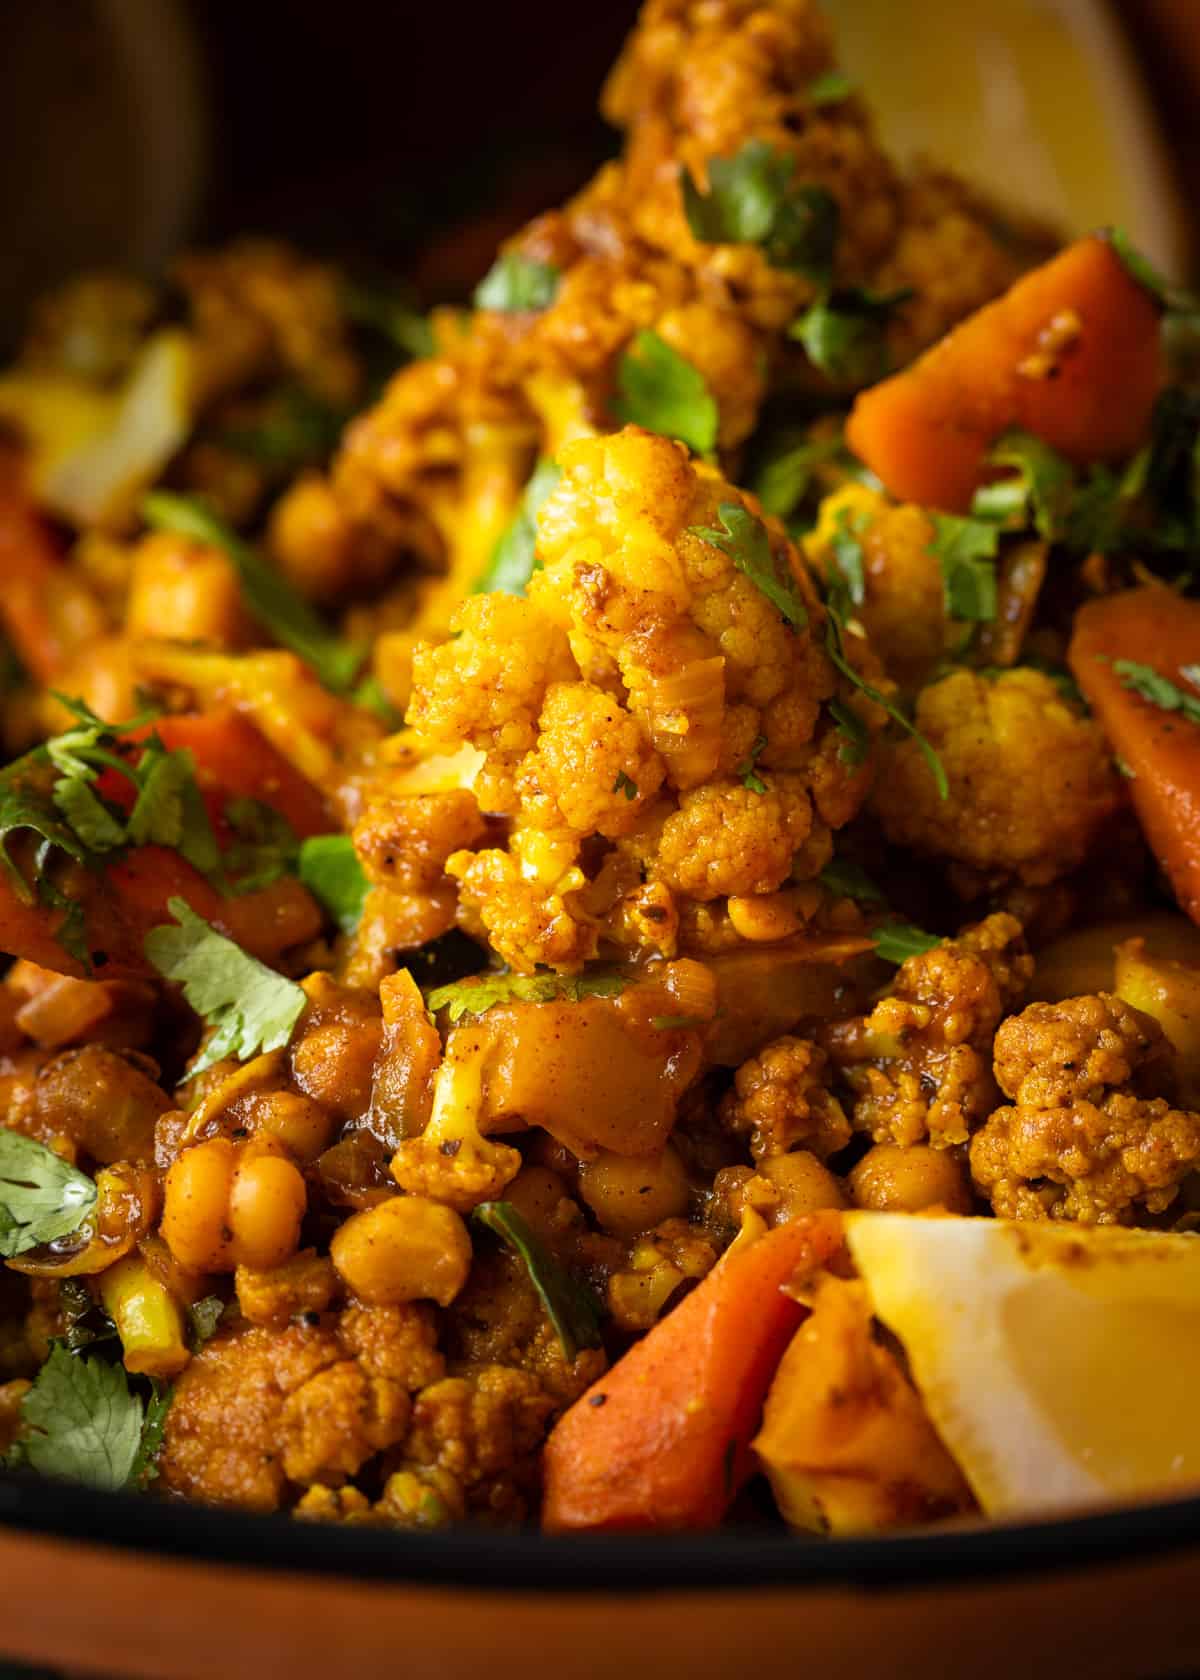 extreme closeup: vegetable tagine recipe with cauliflower and other vegetables showing